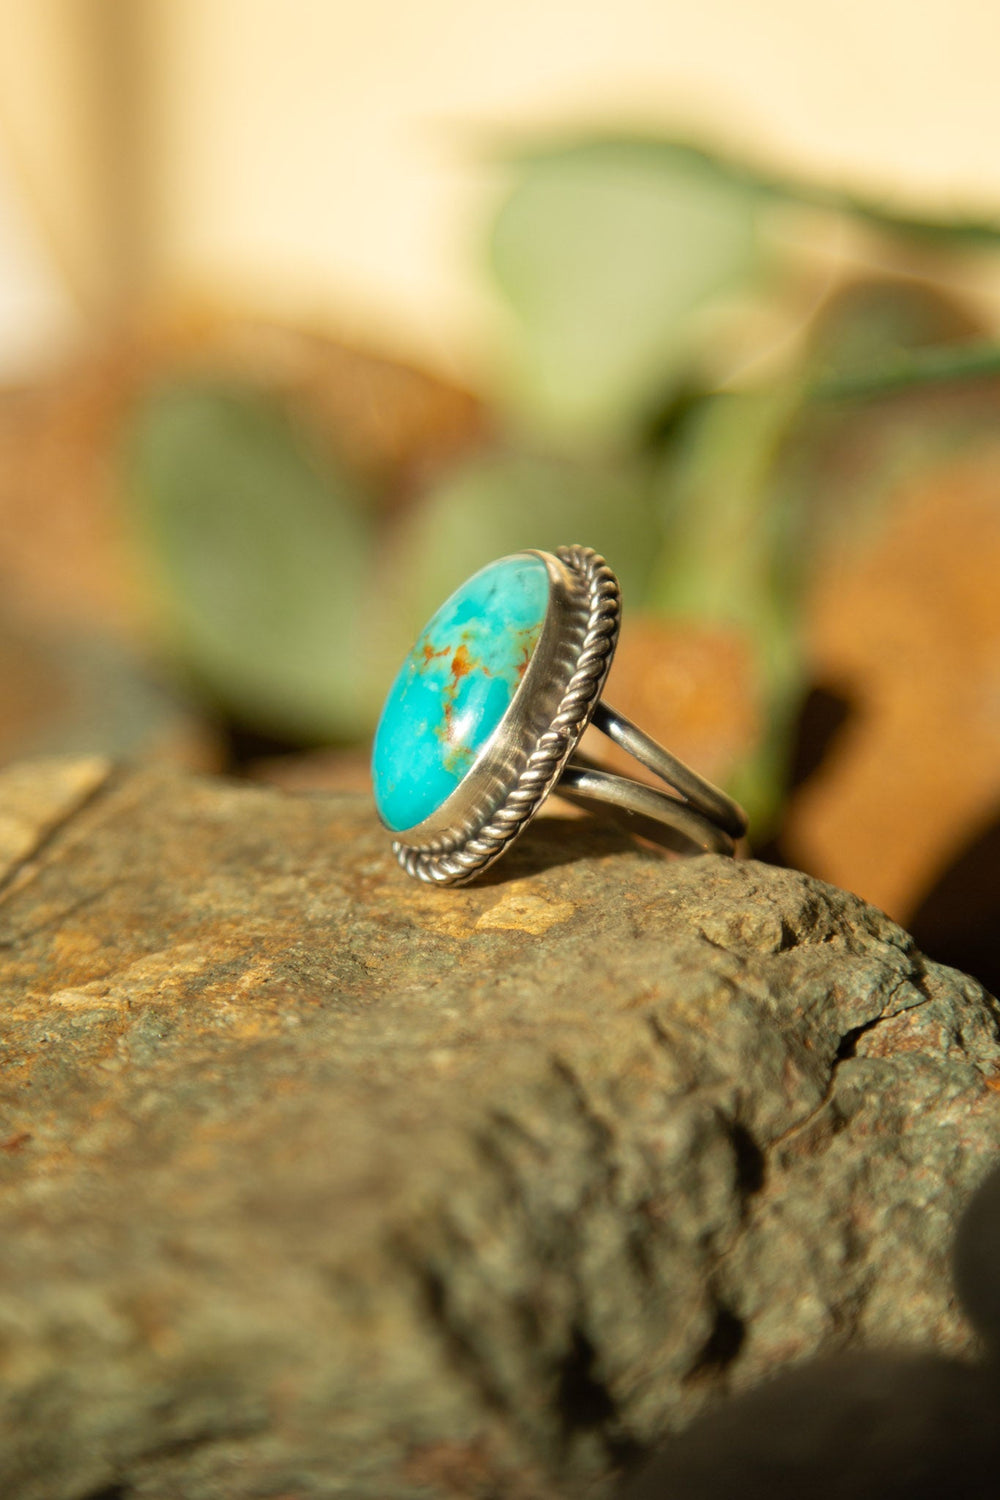 The Micah Turquoise Ring 6, Sz 8.5-Rings-Calli Co., Turquoise and Silver Jewelry, Native American Handmade, Zuni Tribe, Navajo Tribe, Brock Texas